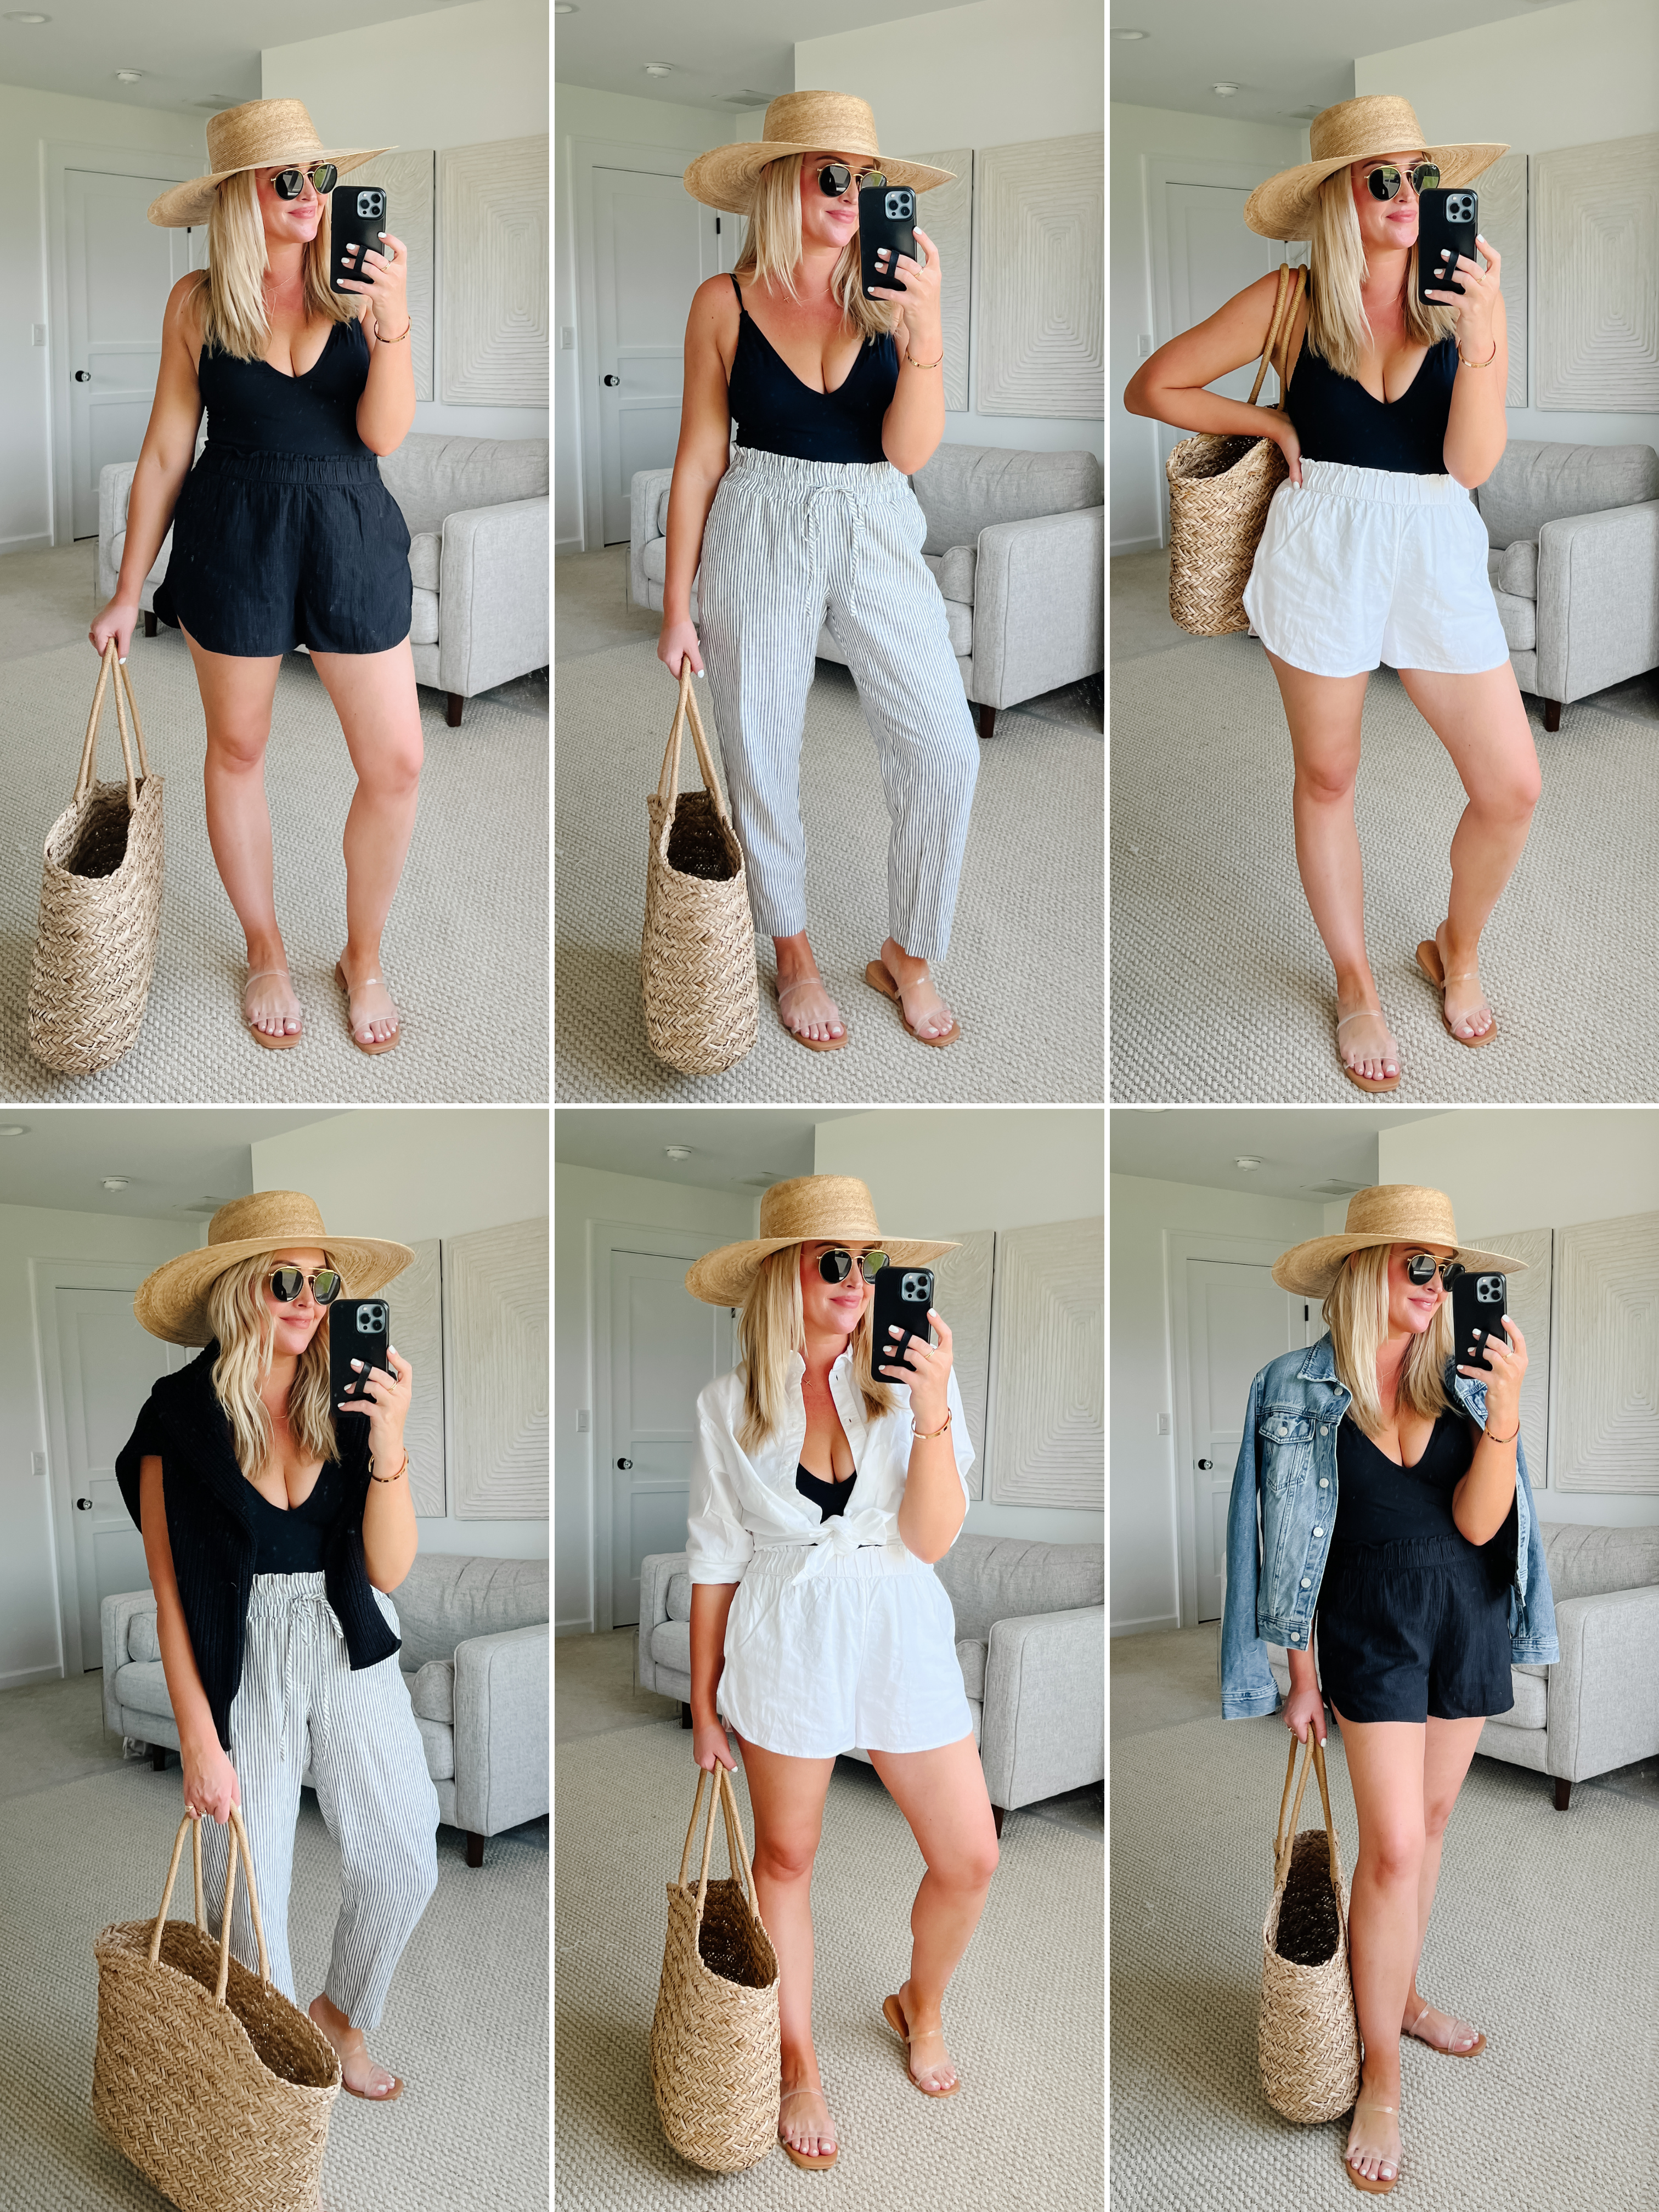 HOW TO STYLE A CLASSIC BLACK ONE PIECE SWIMSUIT